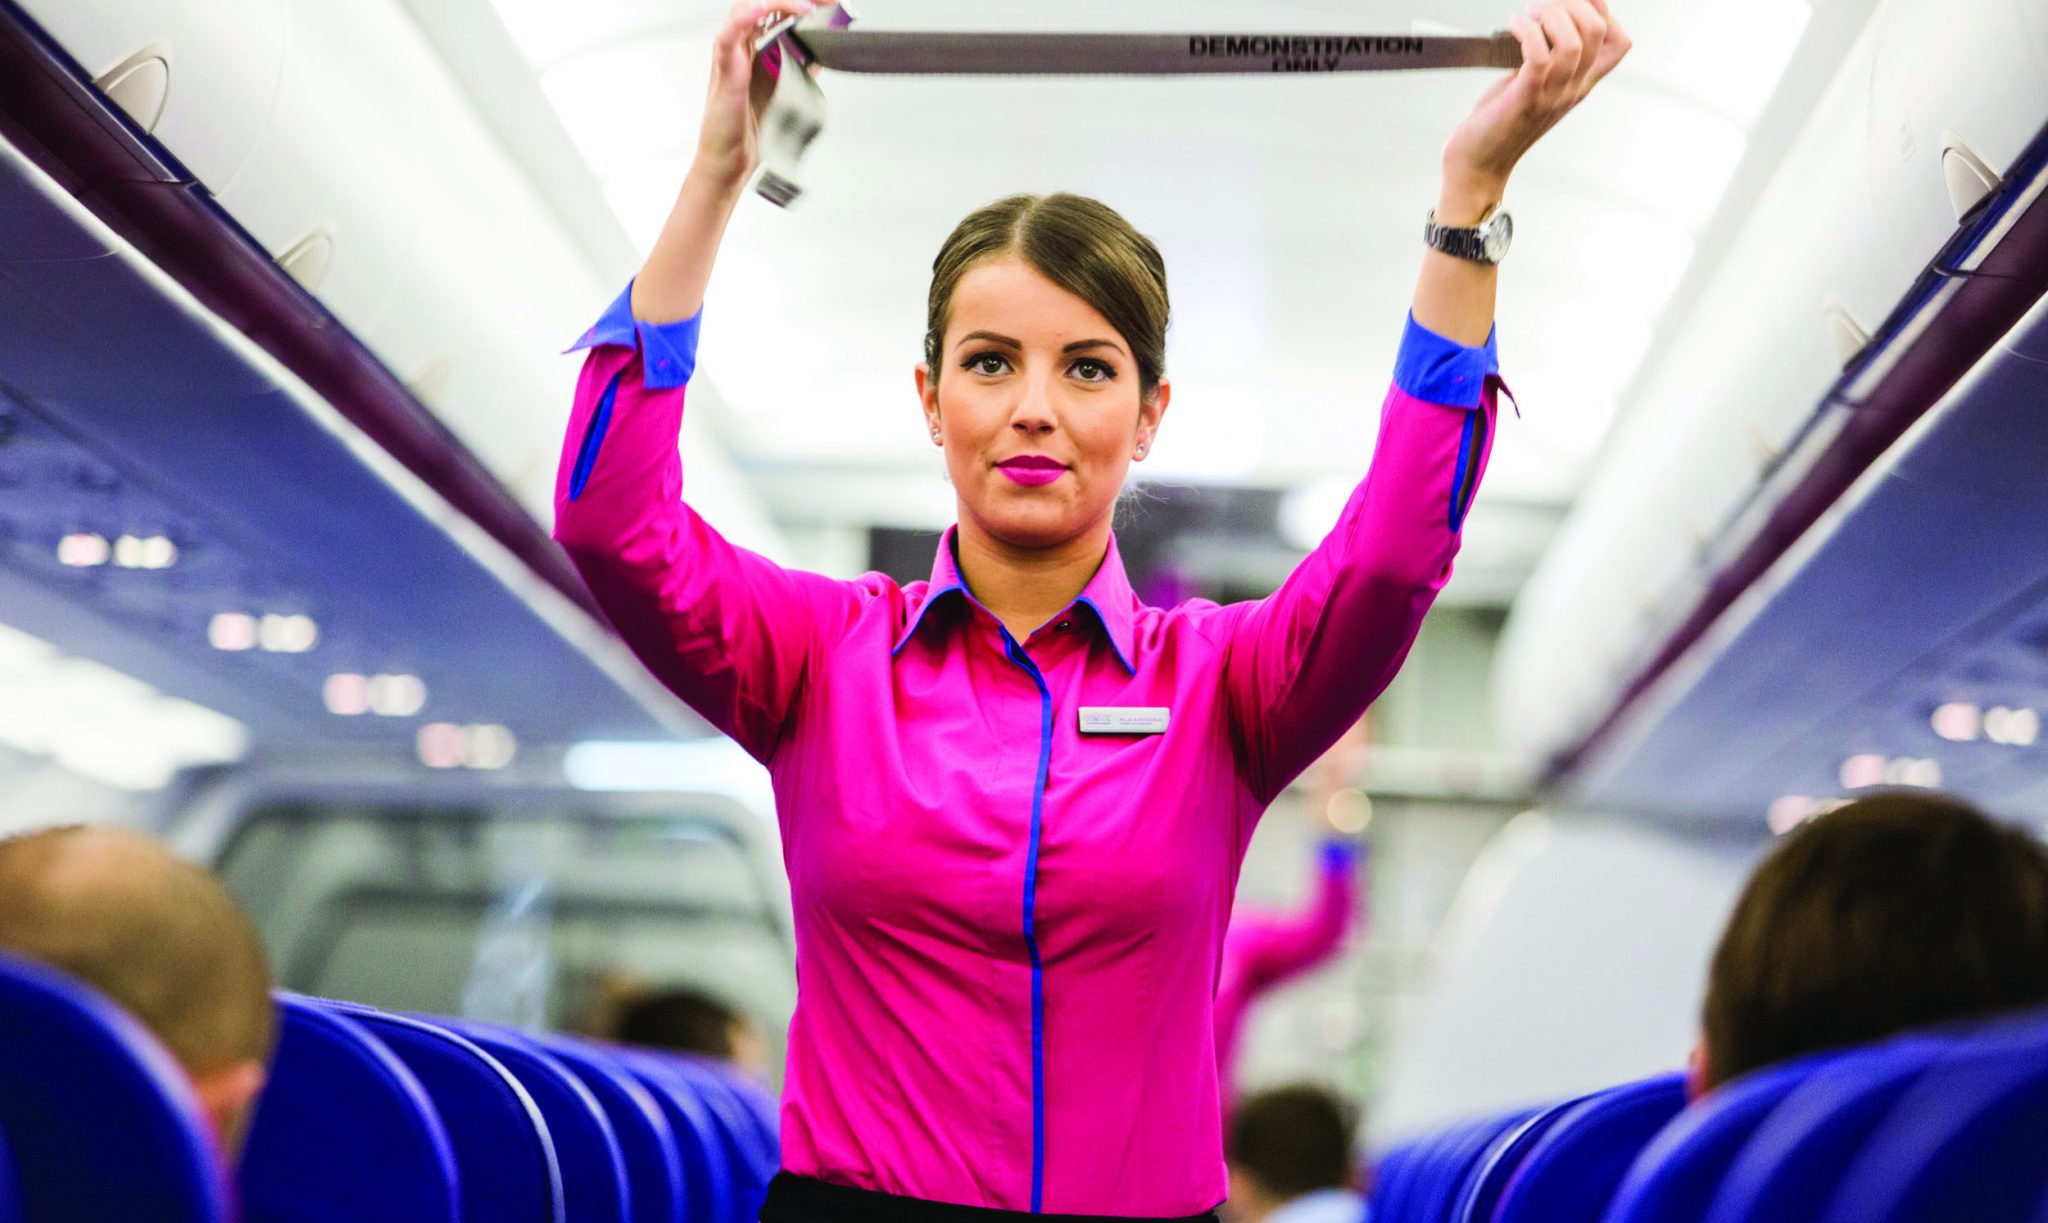 Hungary's Wizz Air Is About to Hire Up To 1,300 Cabin Crew Throughout Europe - Here Are the Details